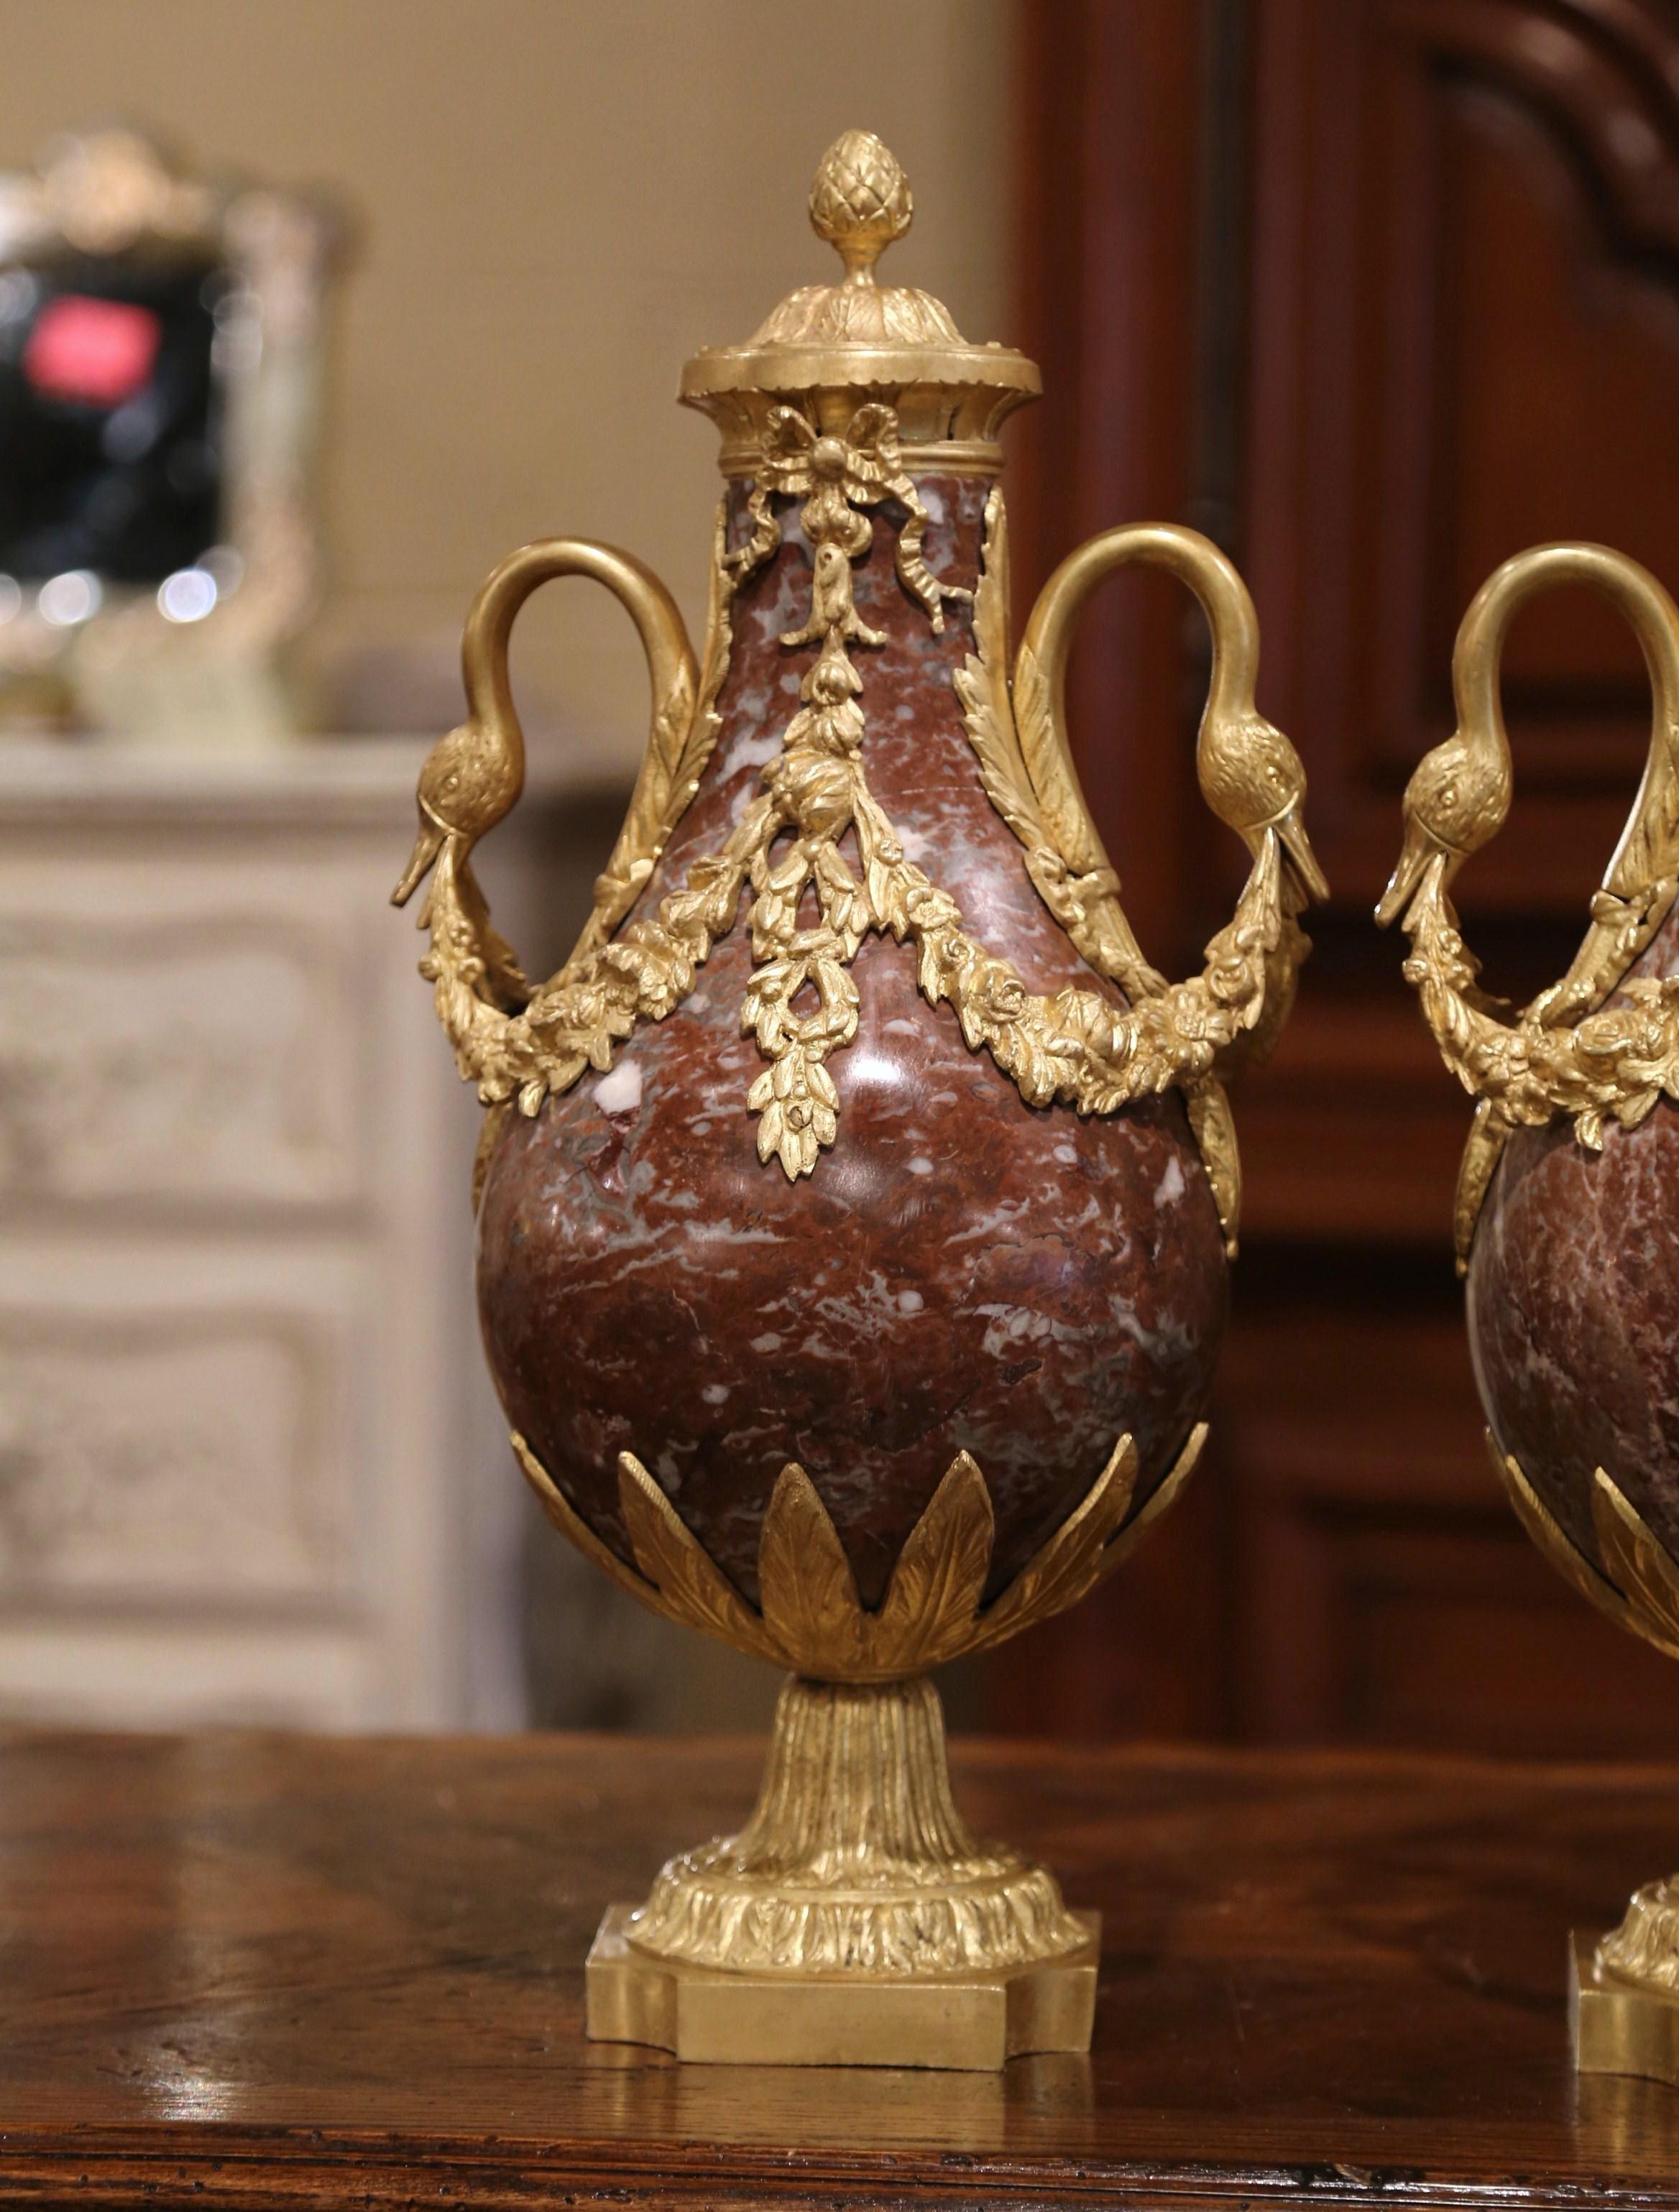 Crafted in France, circa 1870, these antique urns are made of marble and stand on square bronze bases decorated with leaf motifs. Each marble vessel features a decorative cone-shaped bronze finial at the pediment, a pair of bronze side handles with